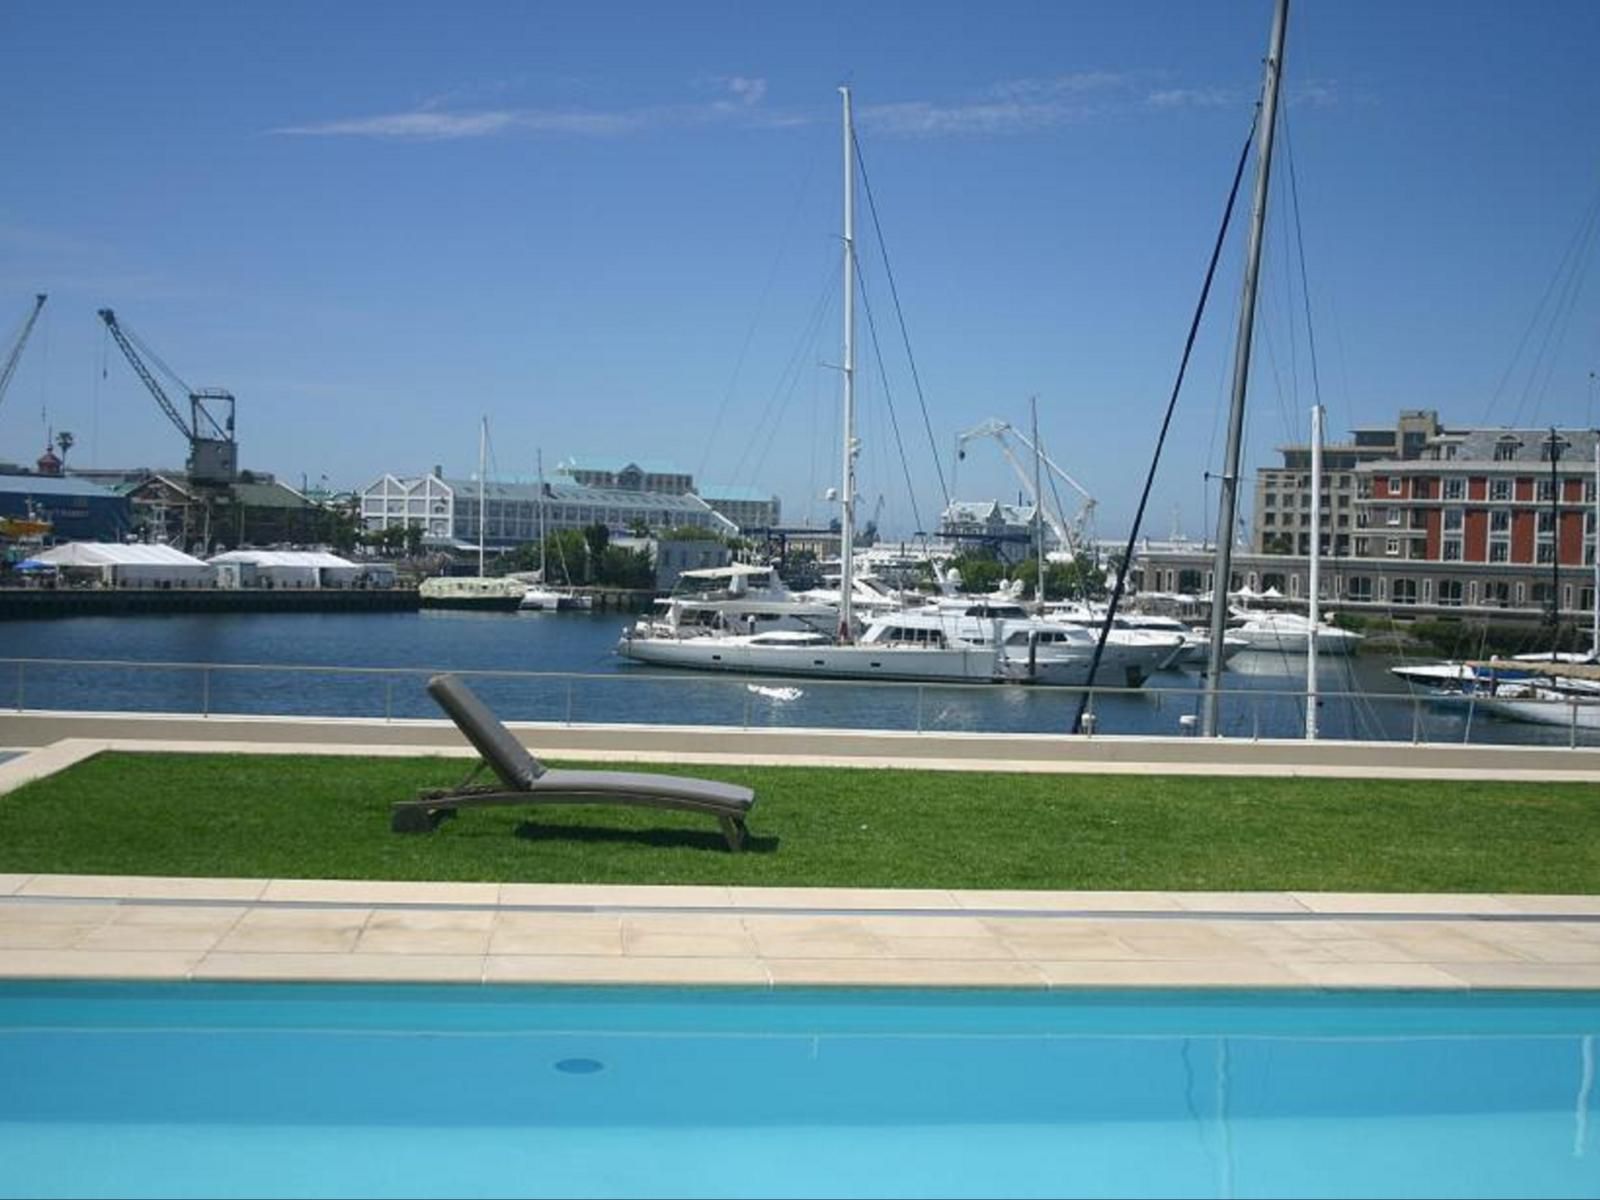 Waterfront Stays 102 V And A Waterfront Cape Town Western Cape South Africa Boat, Vehicle, Swimming Pool